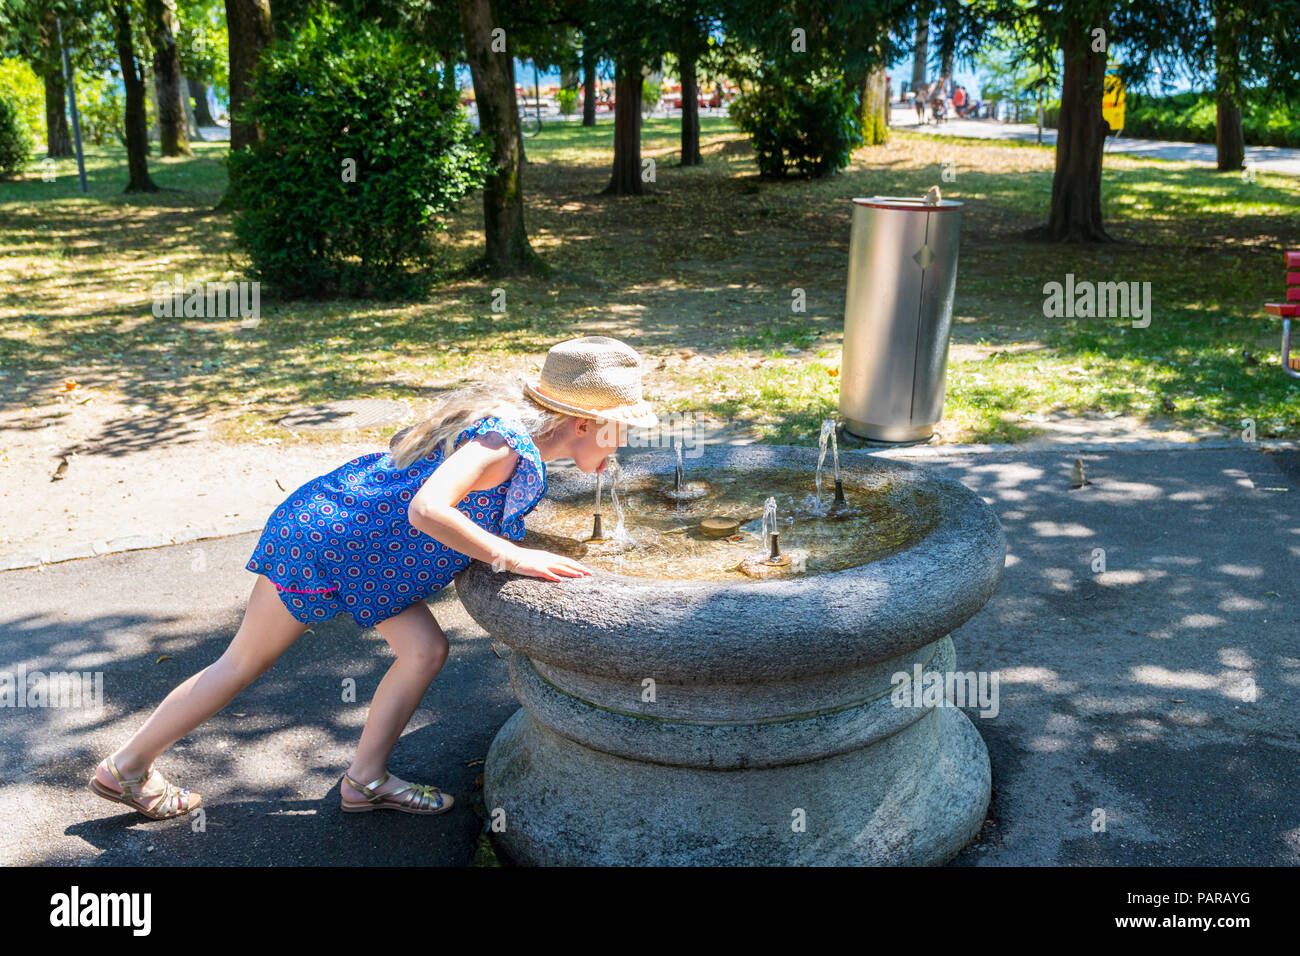 Child, girl kid, drinking from a public fresh water fountain, park on a hot sunny day Stock Photo